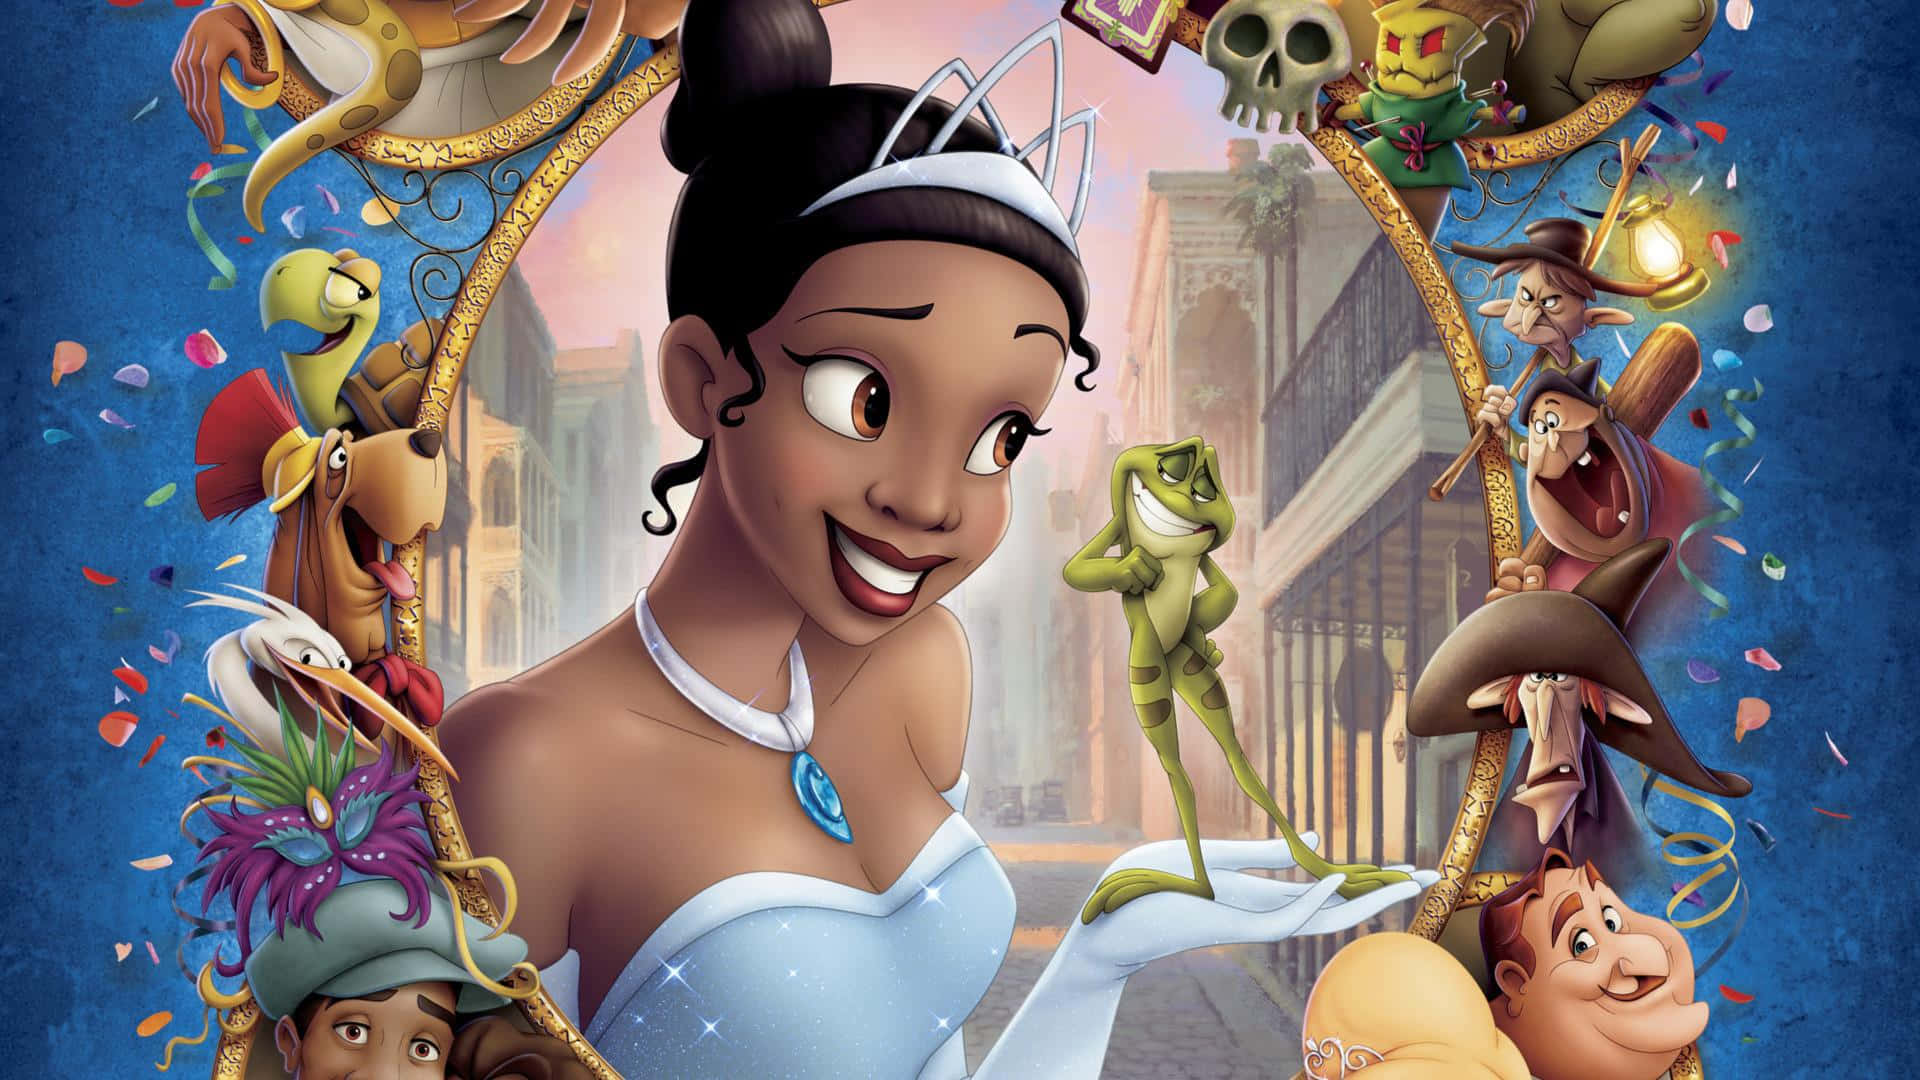 Disney's The Princess And The Frog Wallpaper